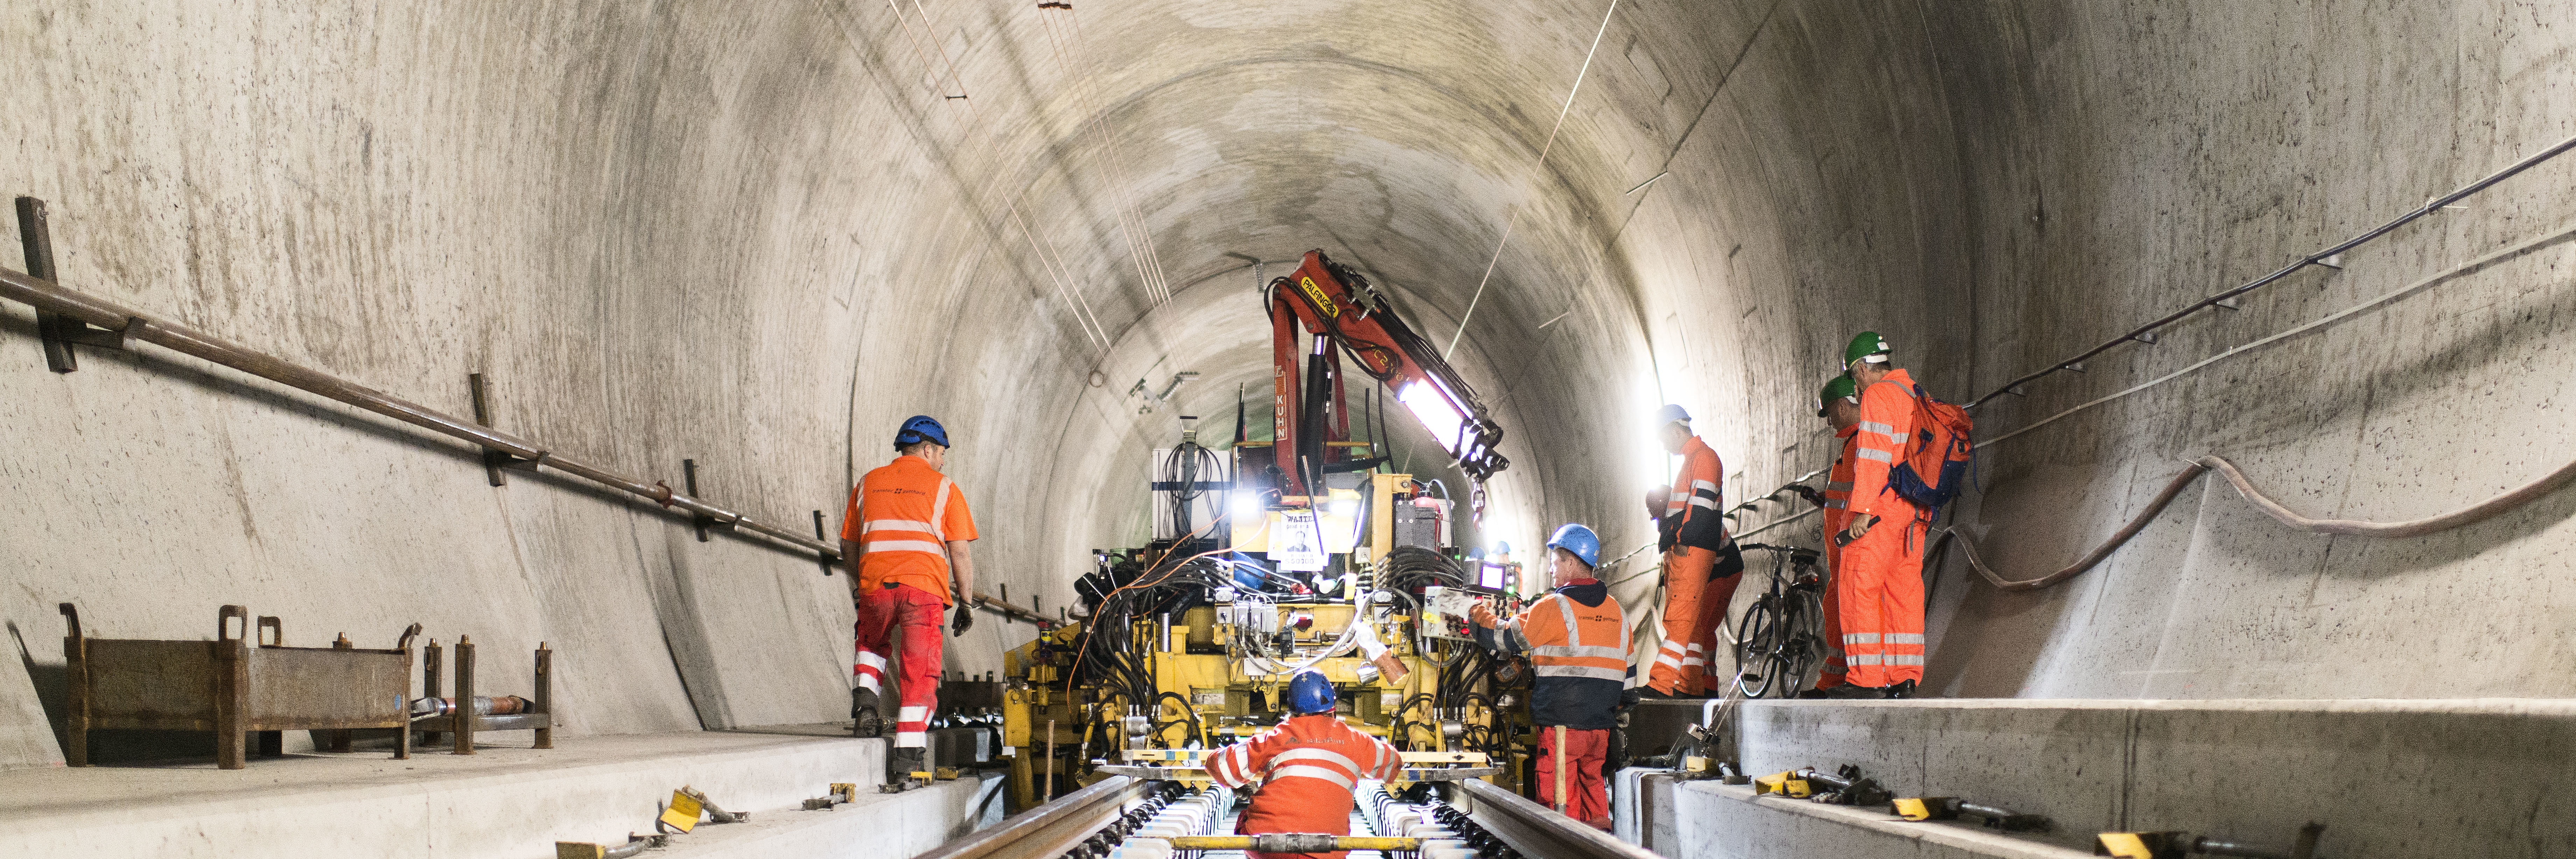 Gotthard base tunnel – Six questions about risk management